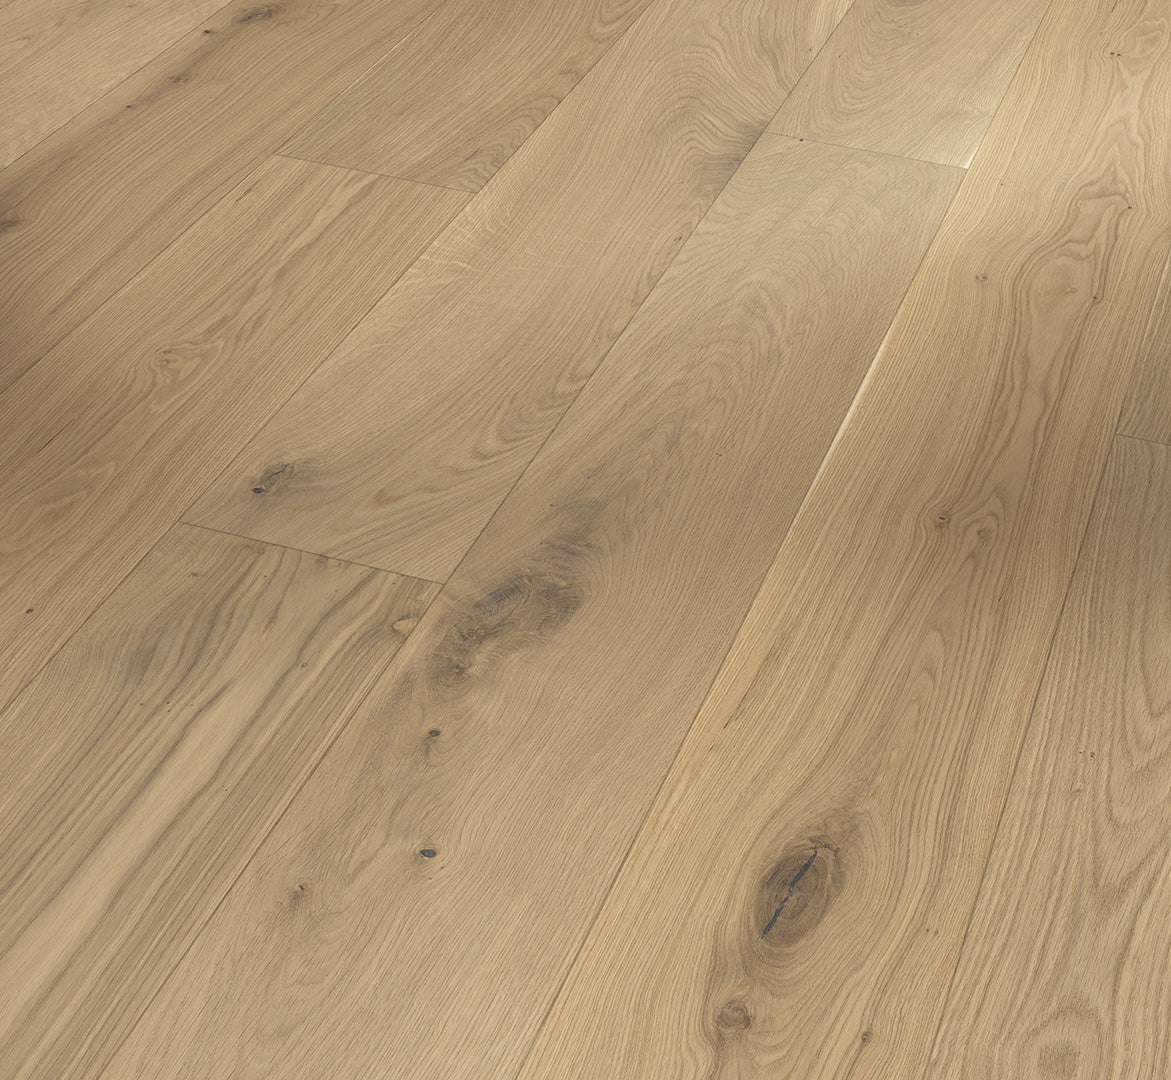 Oak brushed Basic 11-5 Wide plank Natural Oil White (2200 x 185 x 11.5 mm)